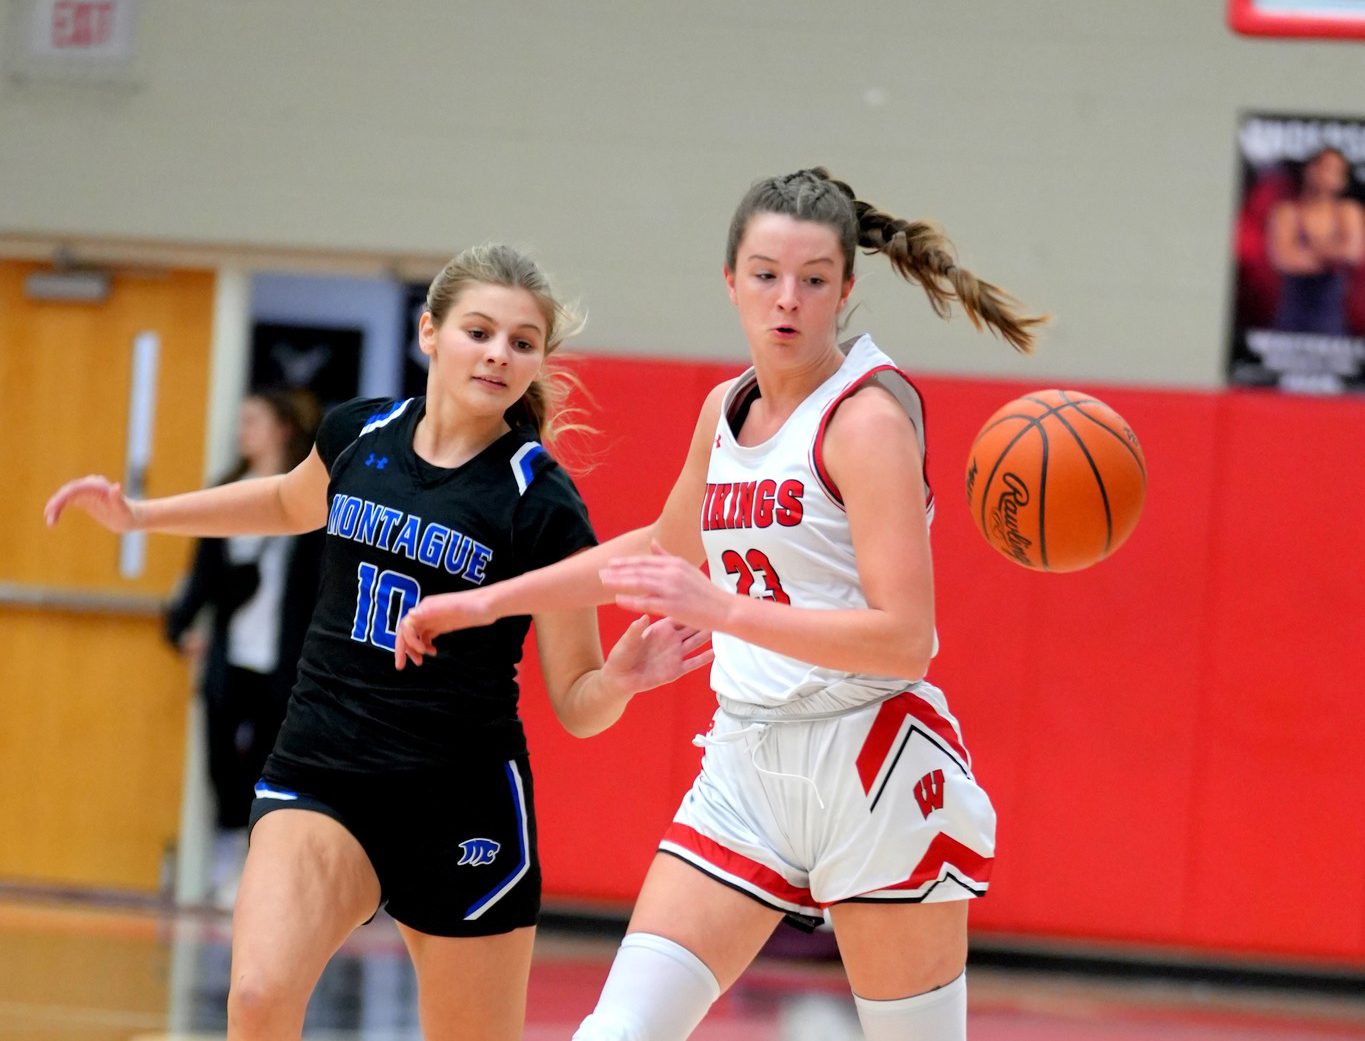 Montague girls basketball squad goes on the road, takes down rival Whitehall